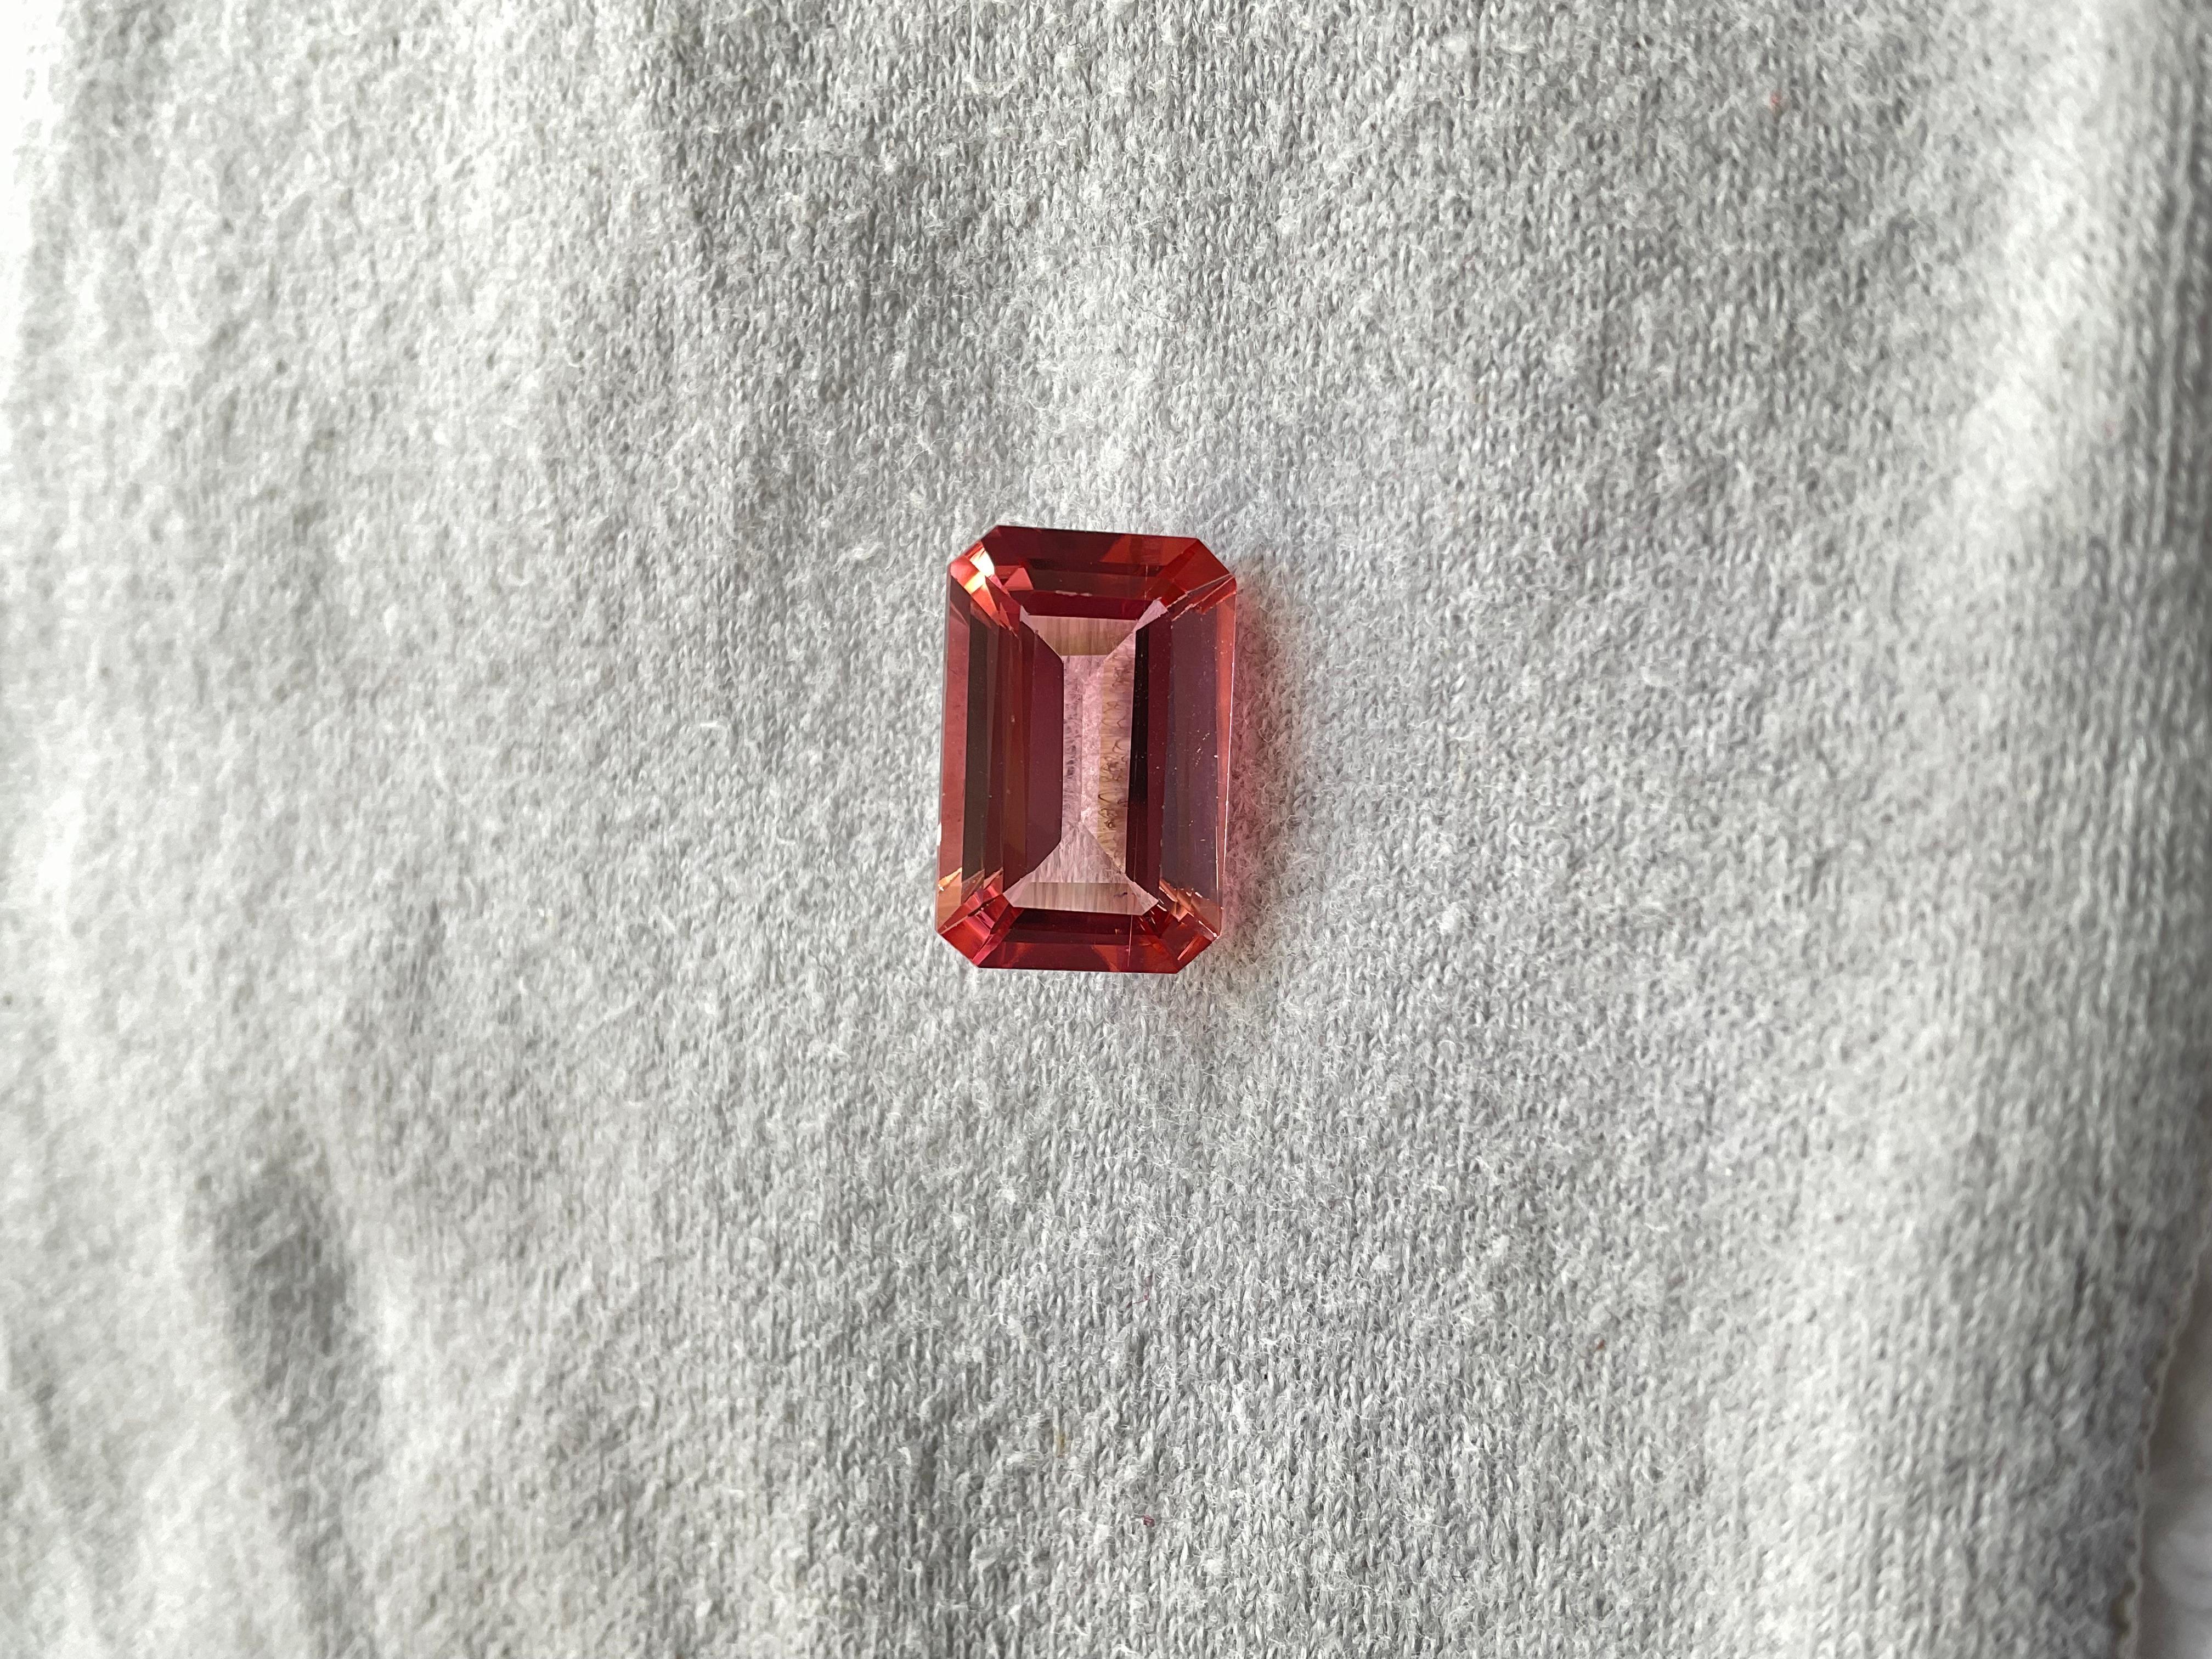 7.43 Carats Pink Tourmaline Octagonal Faceted Cut Stone Natural Gemstone Clean In New Condition For Sale In Jaipur, RJ